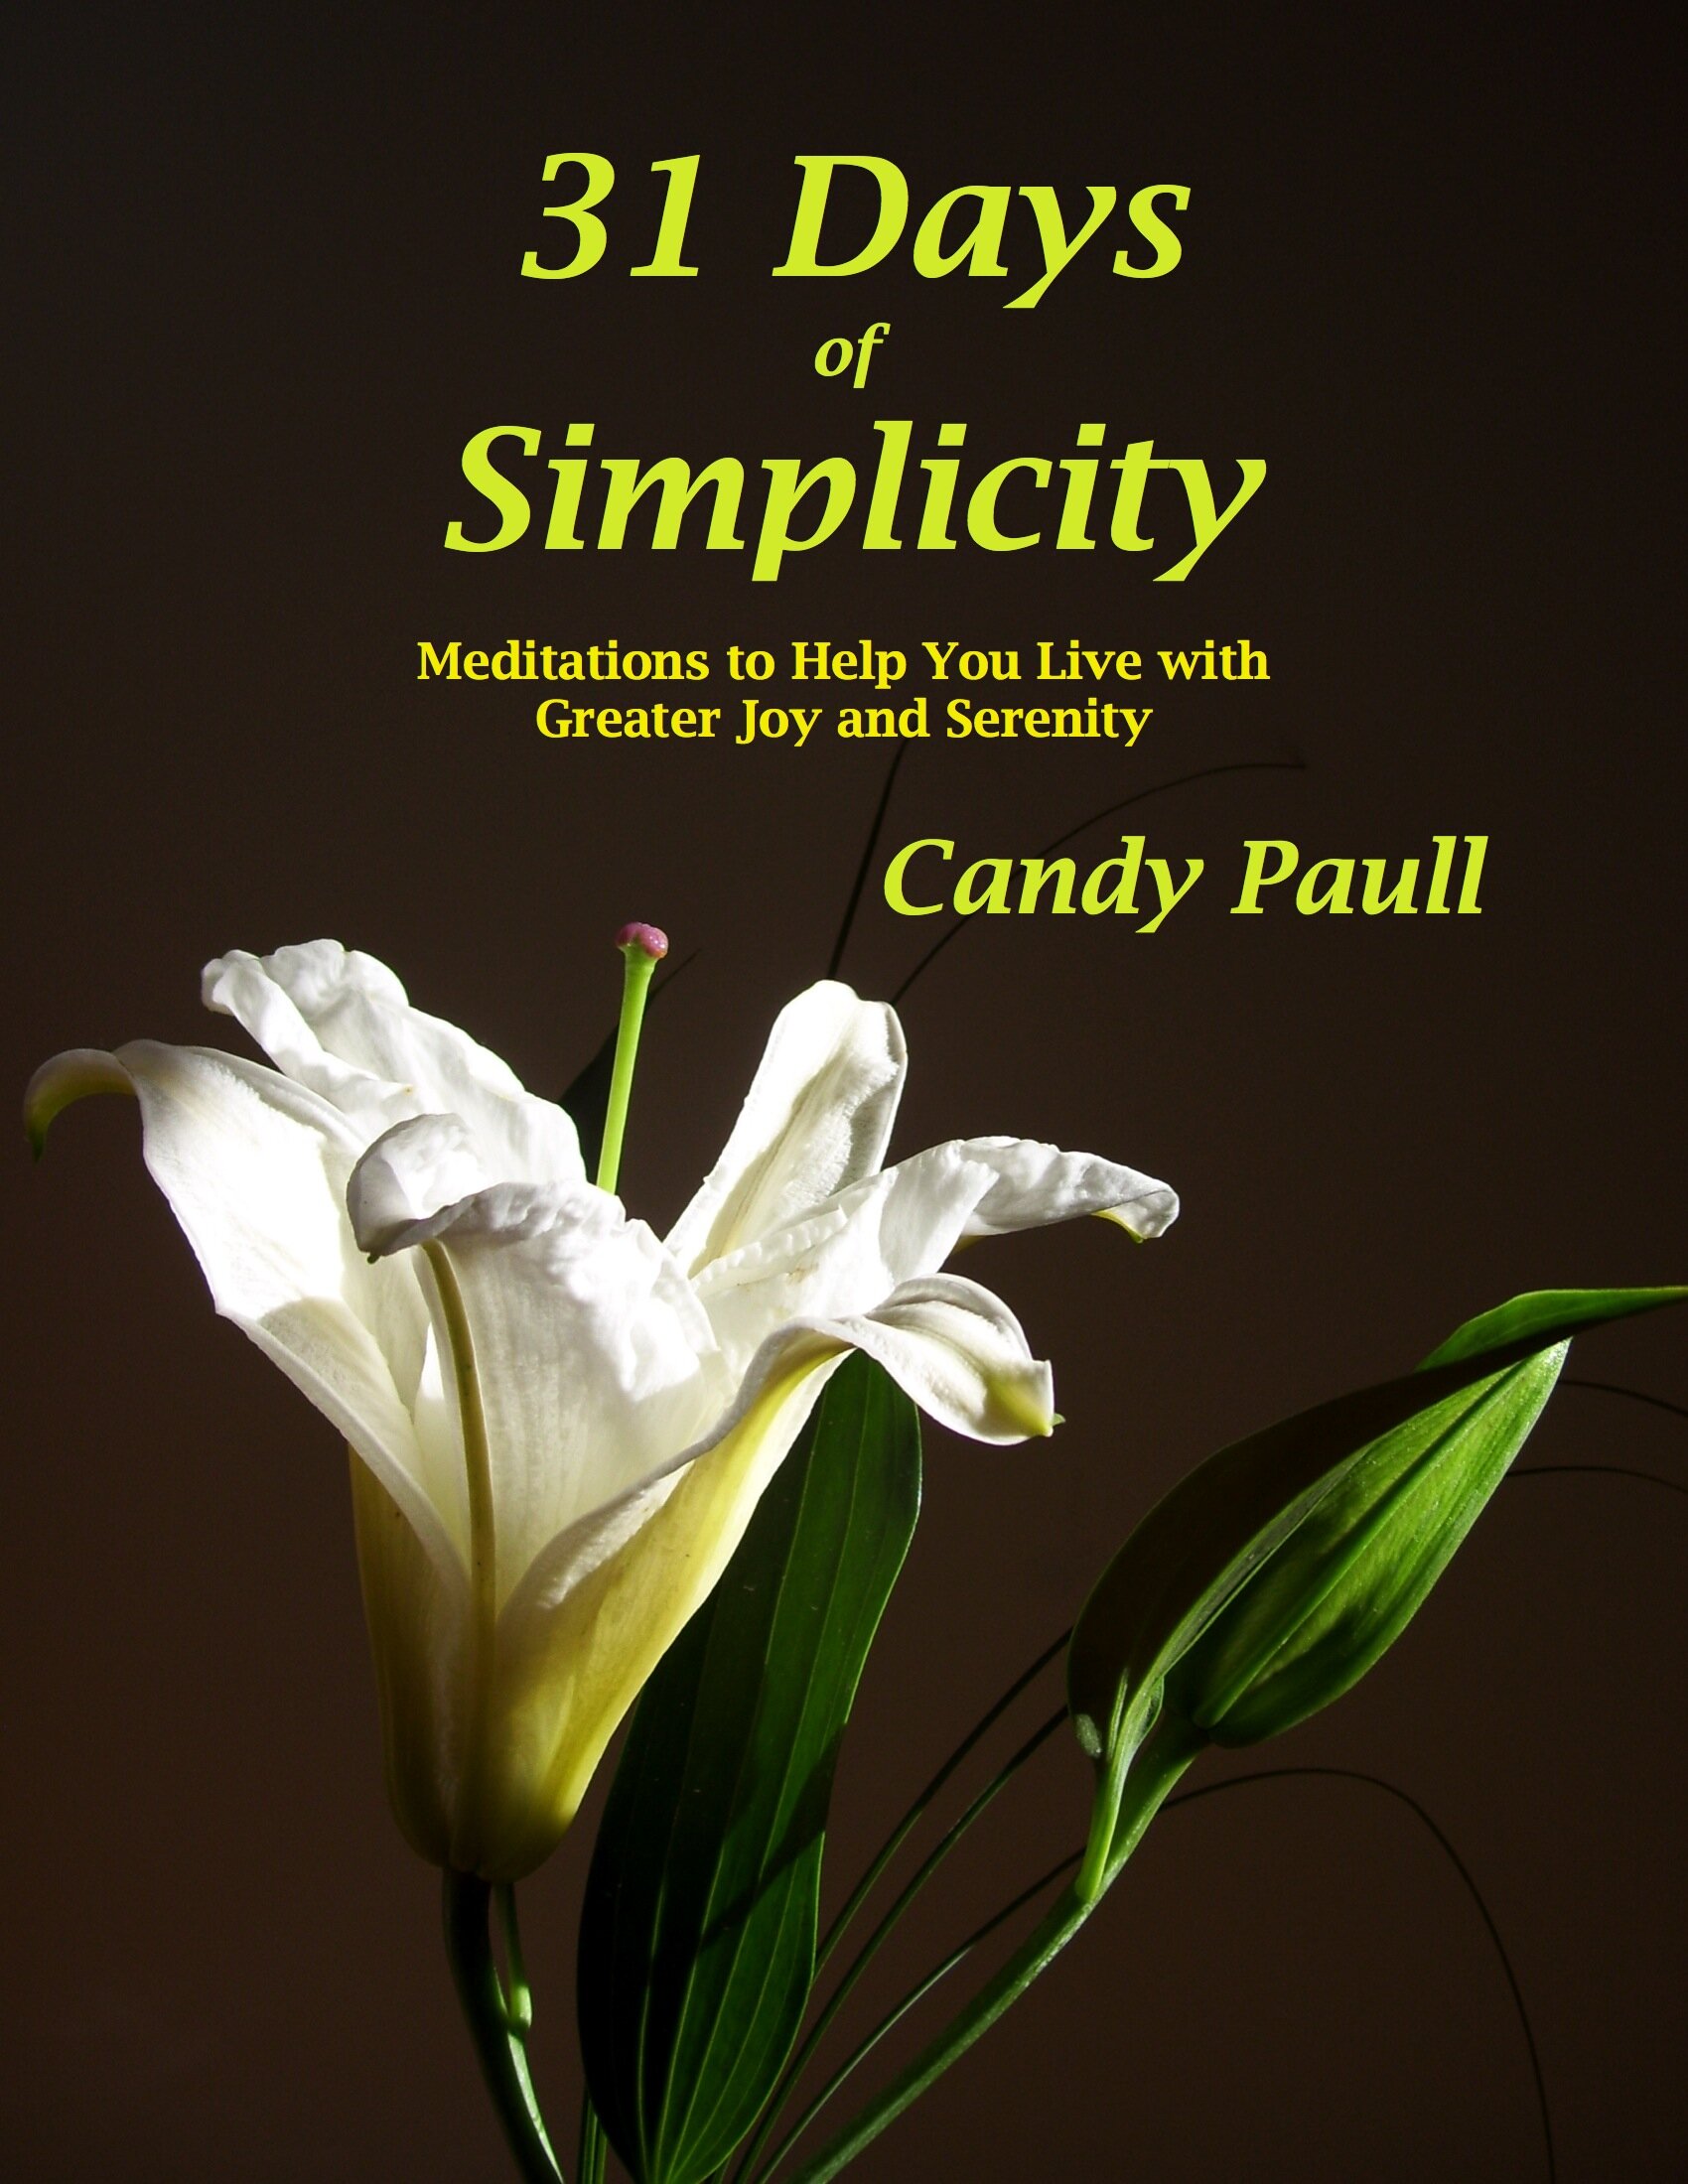 31-days-of-simplicity-meditations-to-help-you-live-with-greater-joy-and-serenity.jpg